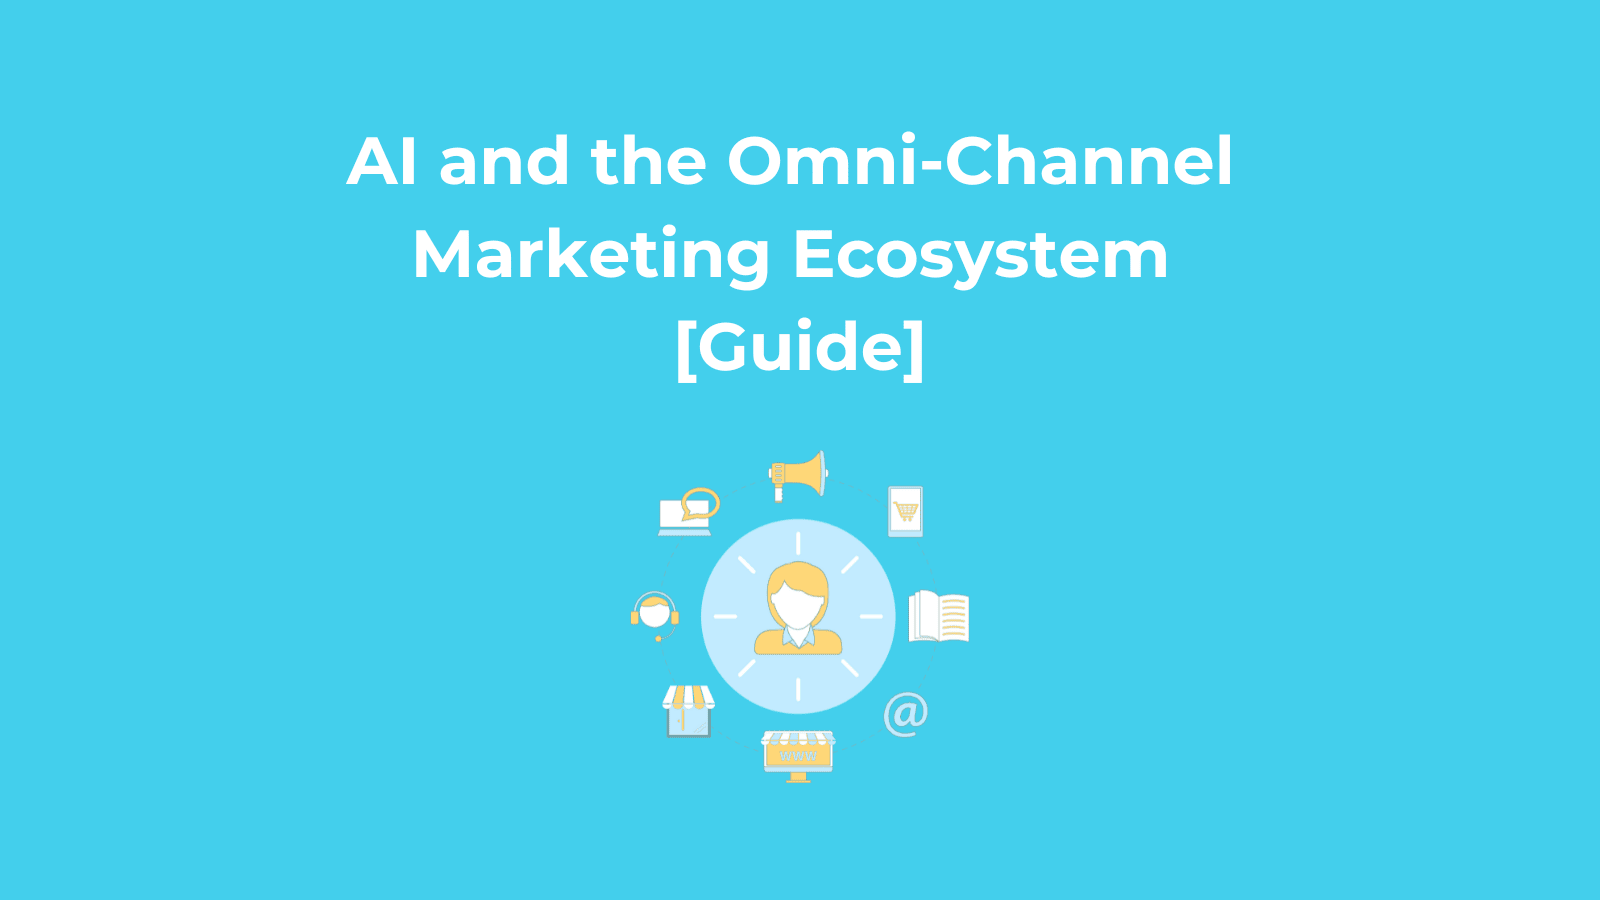 AI and the Omni-Channel Marketing Ecosystem Guide